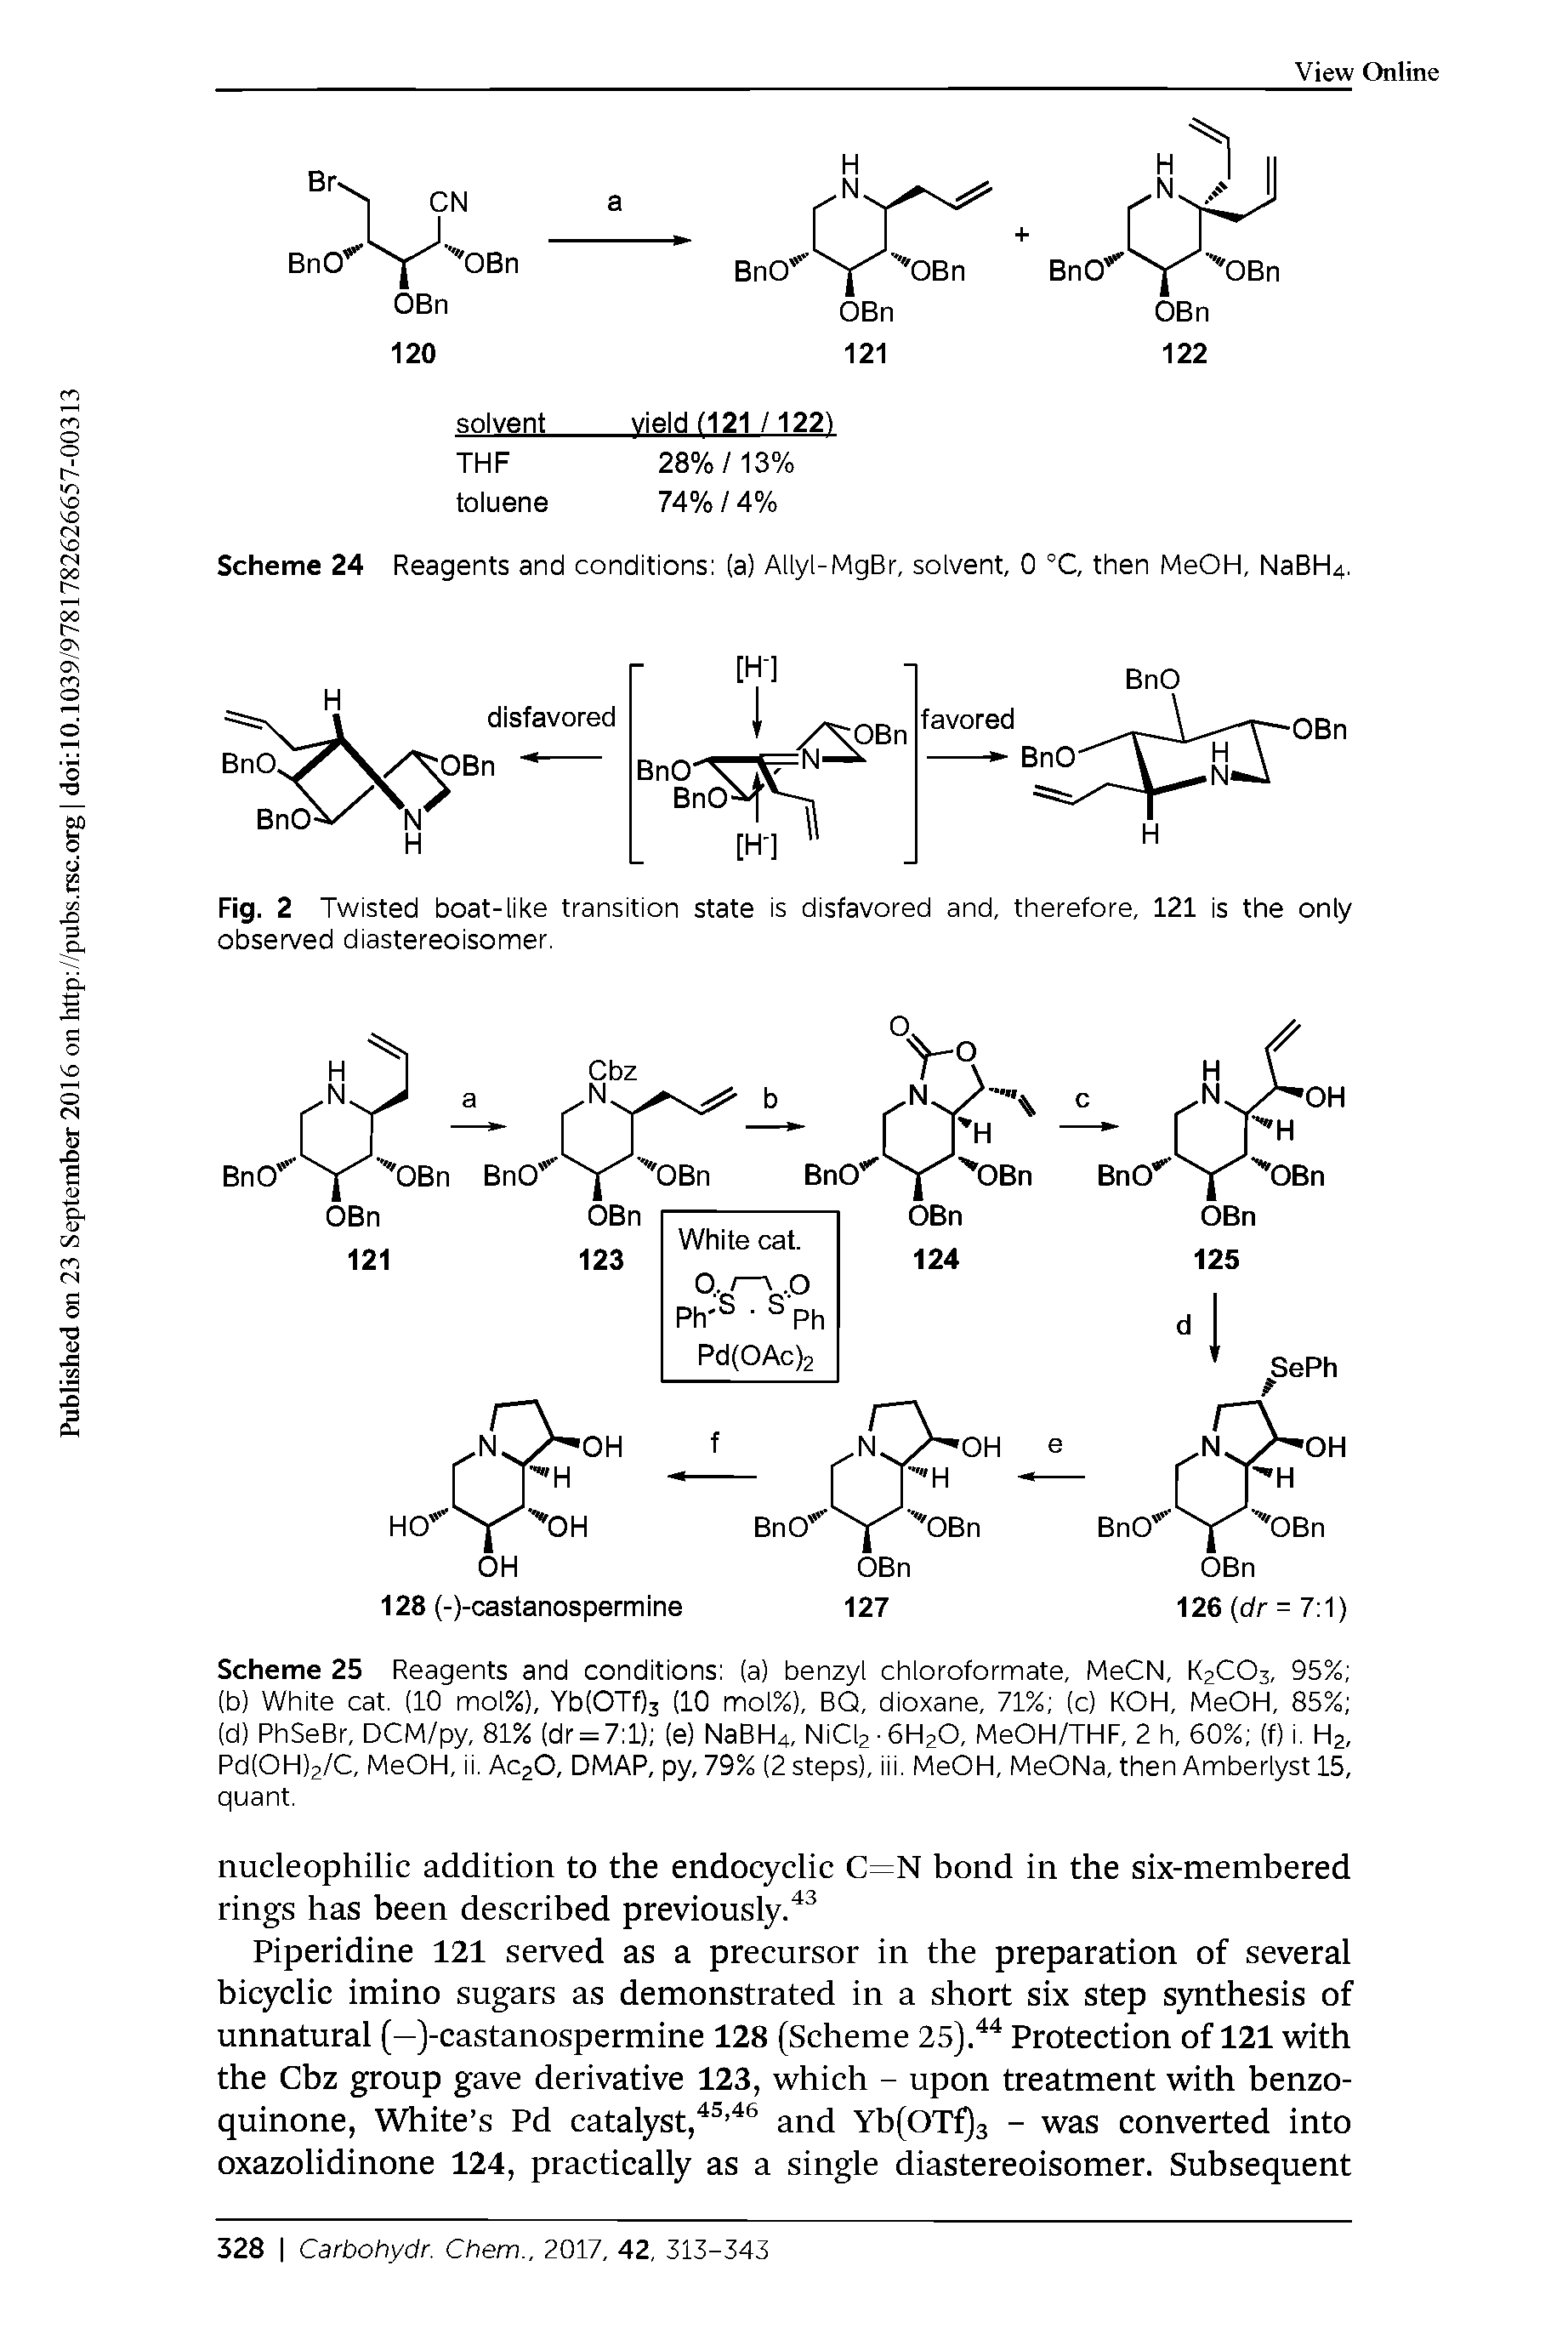 Fig. 2 Twisted boat-like transition state is disfavored and, therefore, 121 is the only observed diastereoisomer.